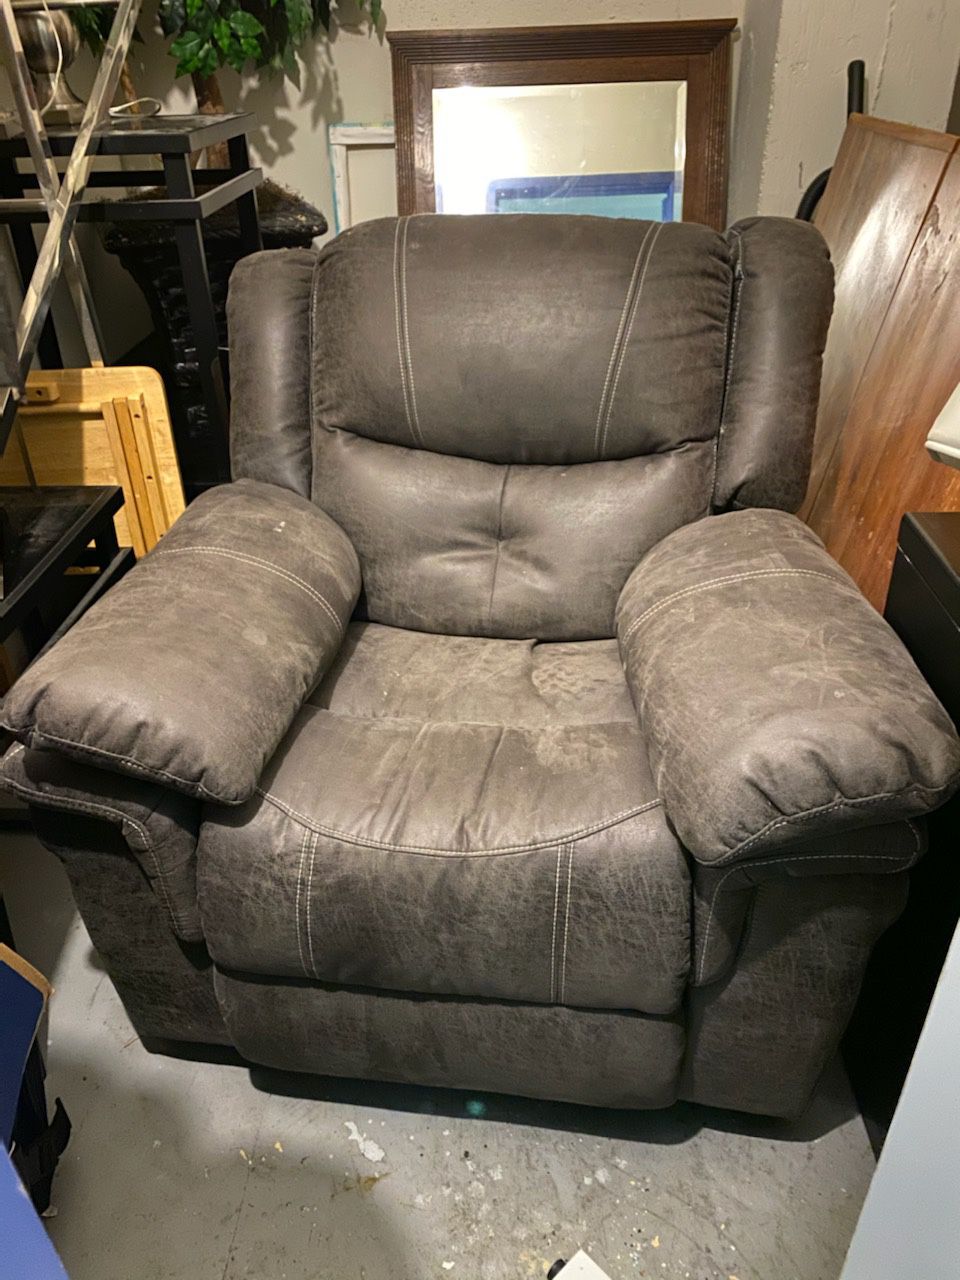 Recliner rocker super comfortable less than 11 months old paid over 400$